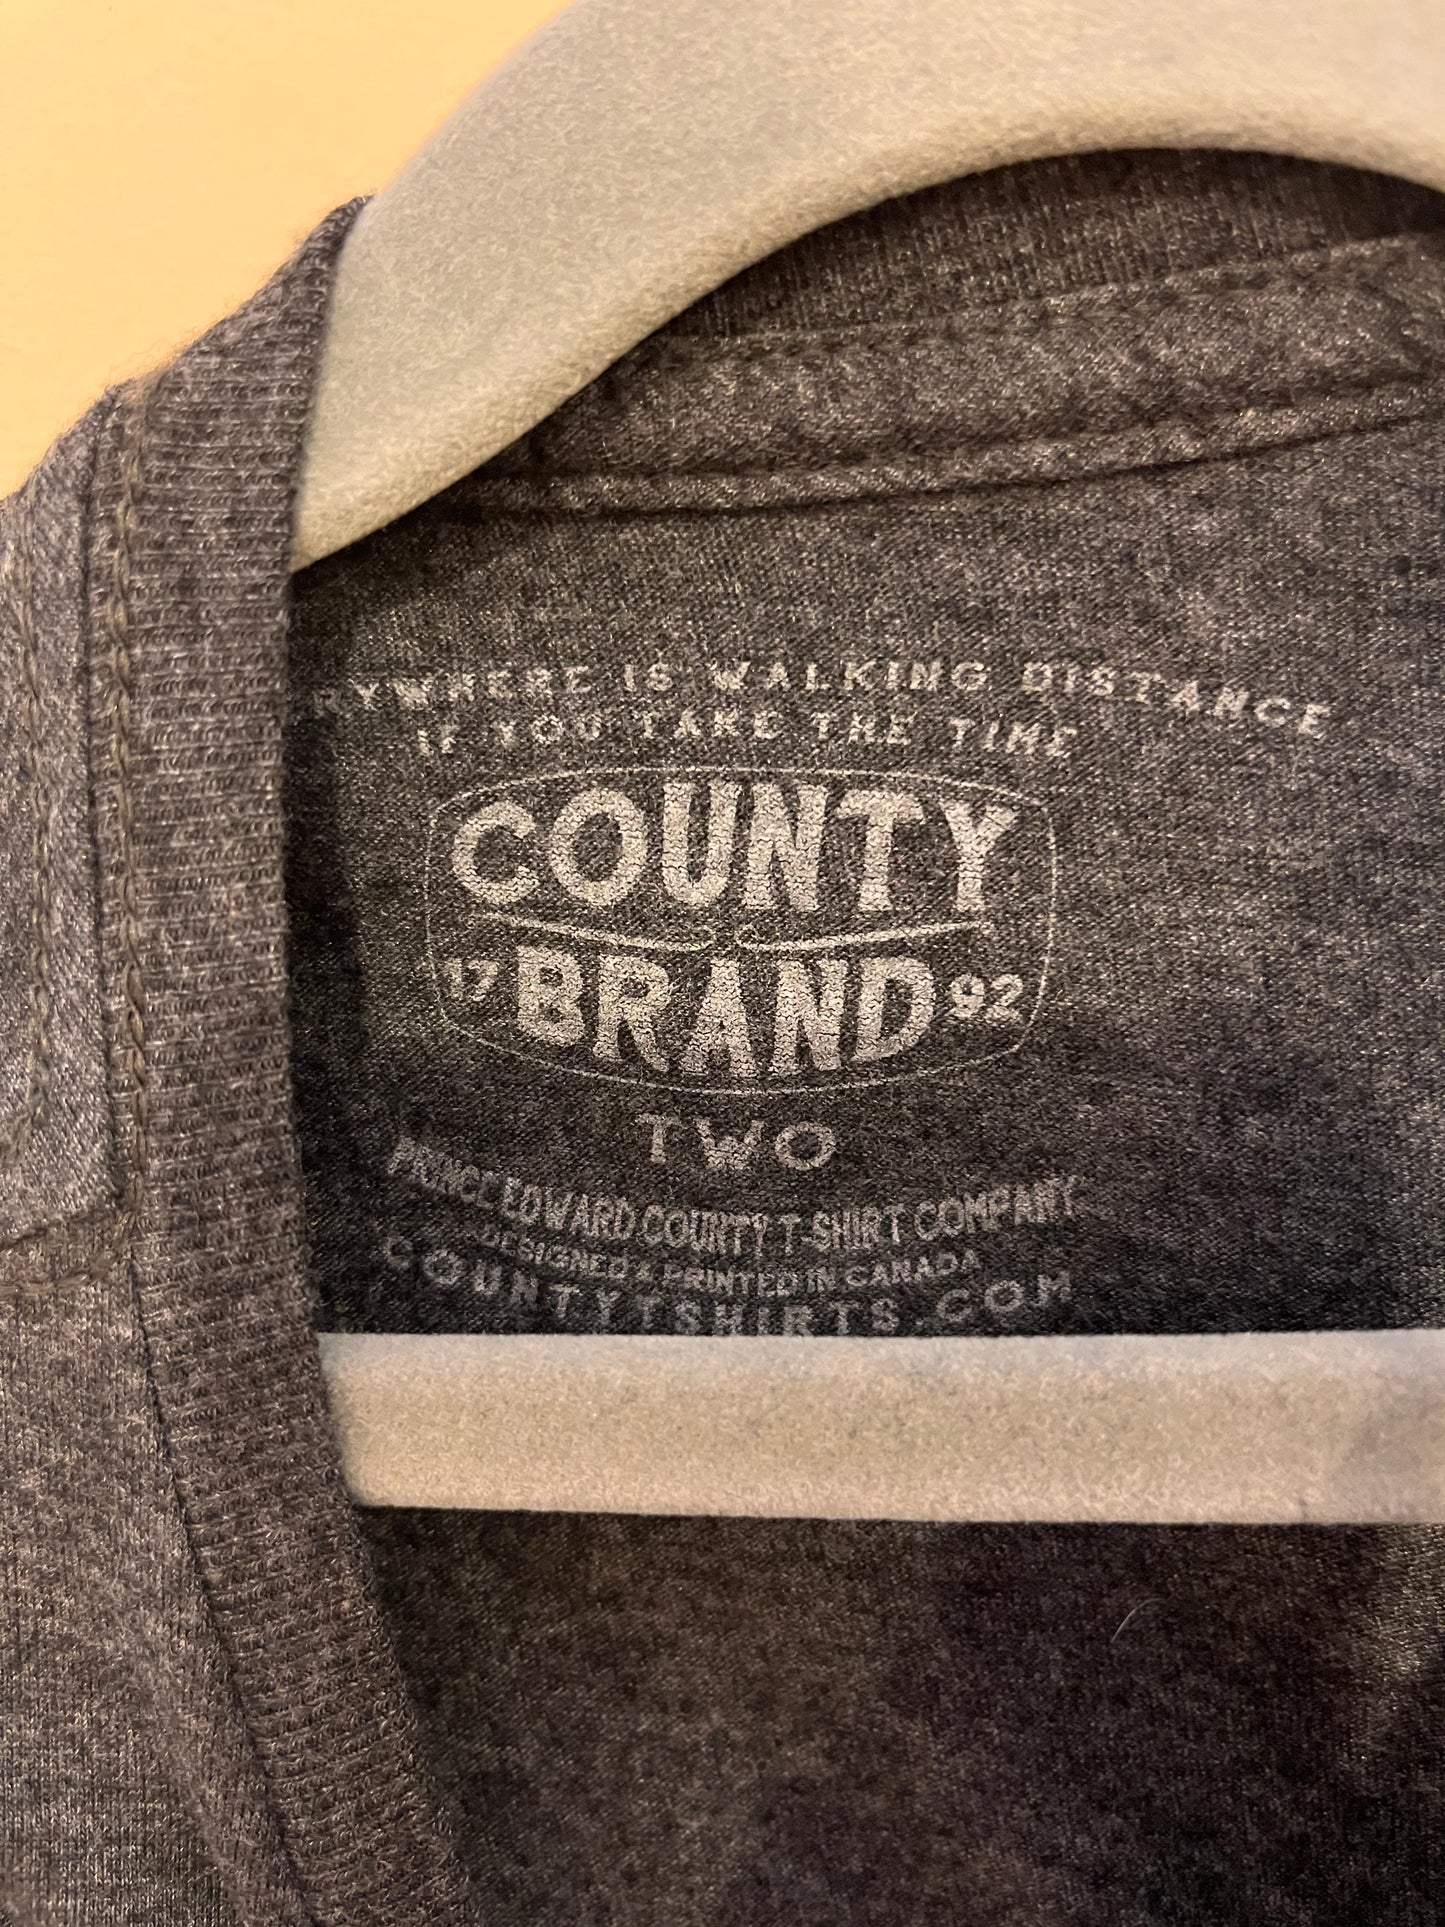 County Brand "County Grown" T-Shirt (2T)